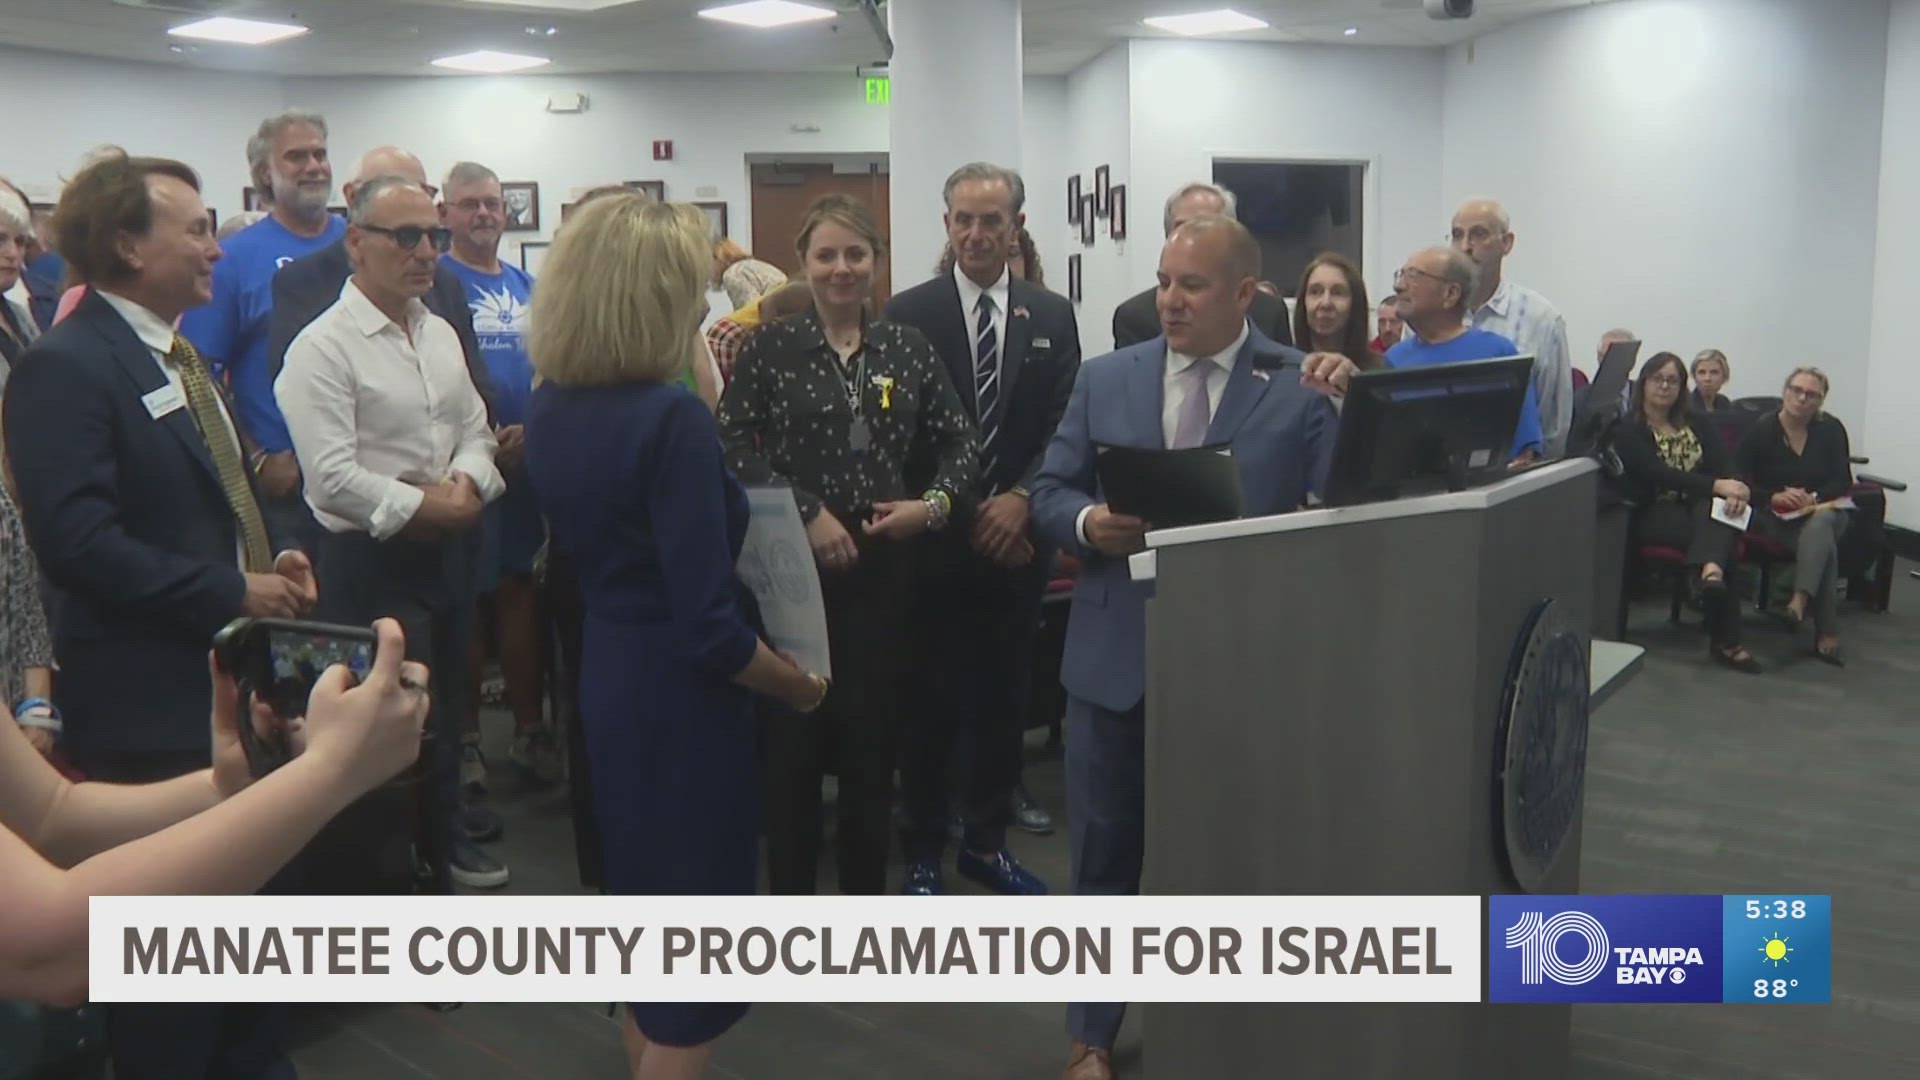 The proclamation adopted by Manatee County states that Israel has the right to defend itself after the attack on October 7.